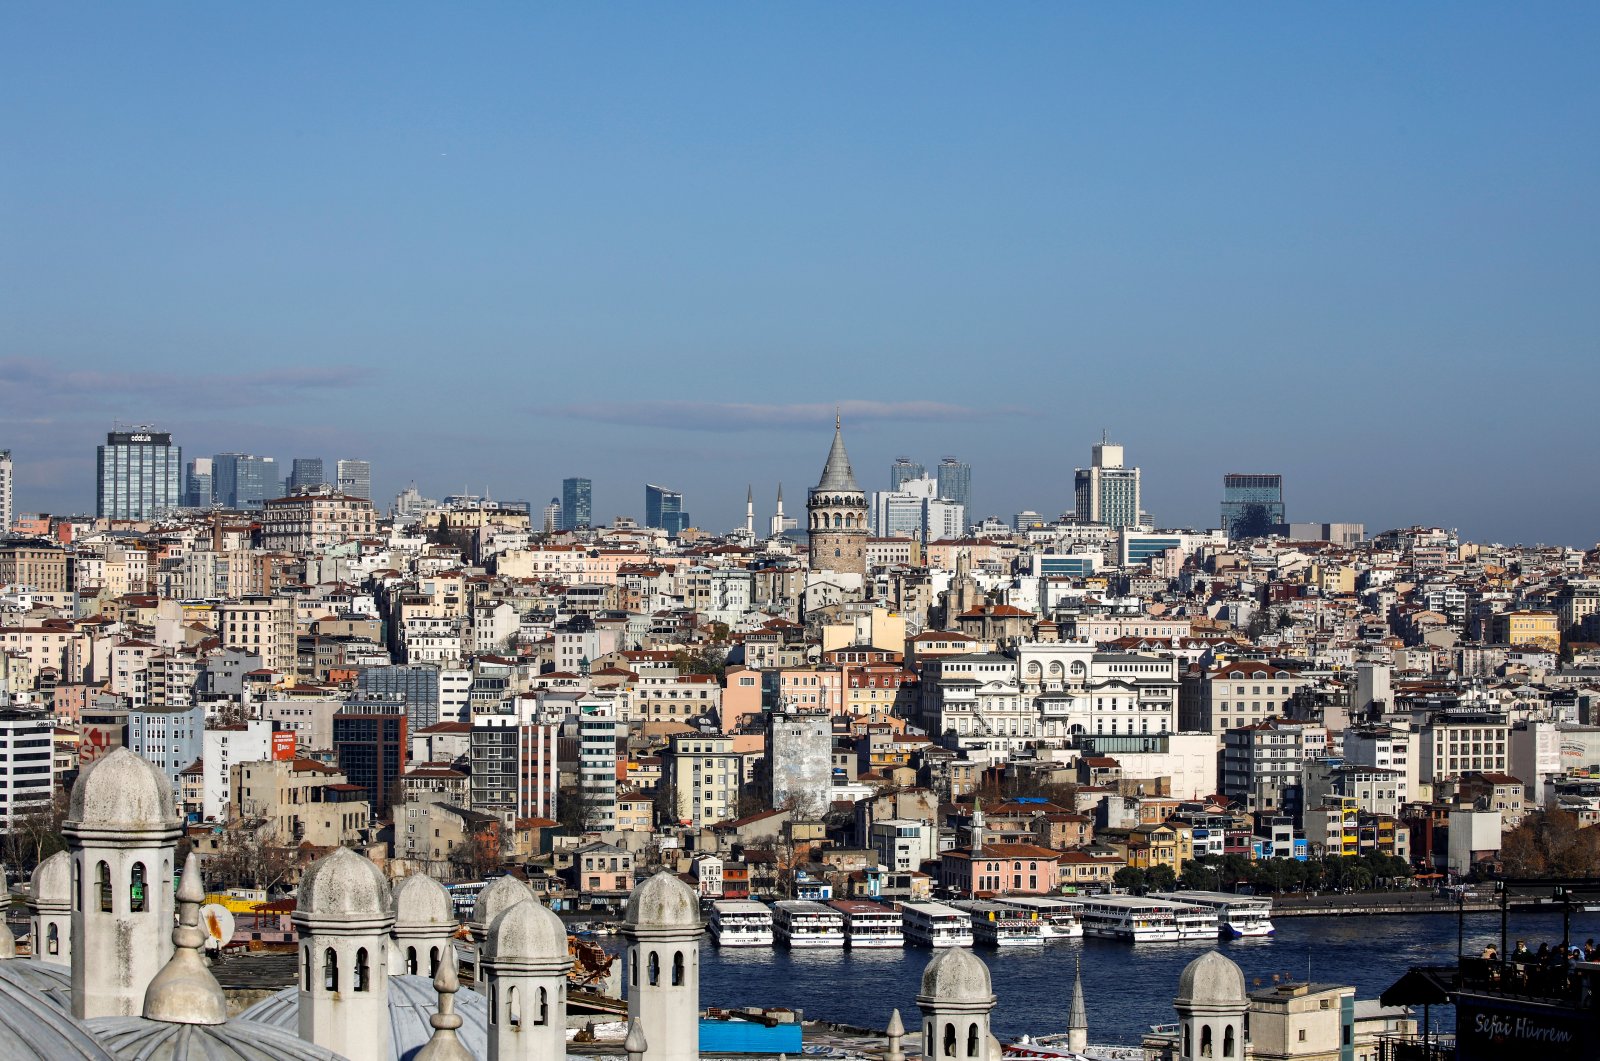 A general view of Galata Tower and surrounding neighborhood from the garden of Süleymaniye Mosque in Istanbul, Turkey, Dec. 6, 2021. (Reuters Photo)